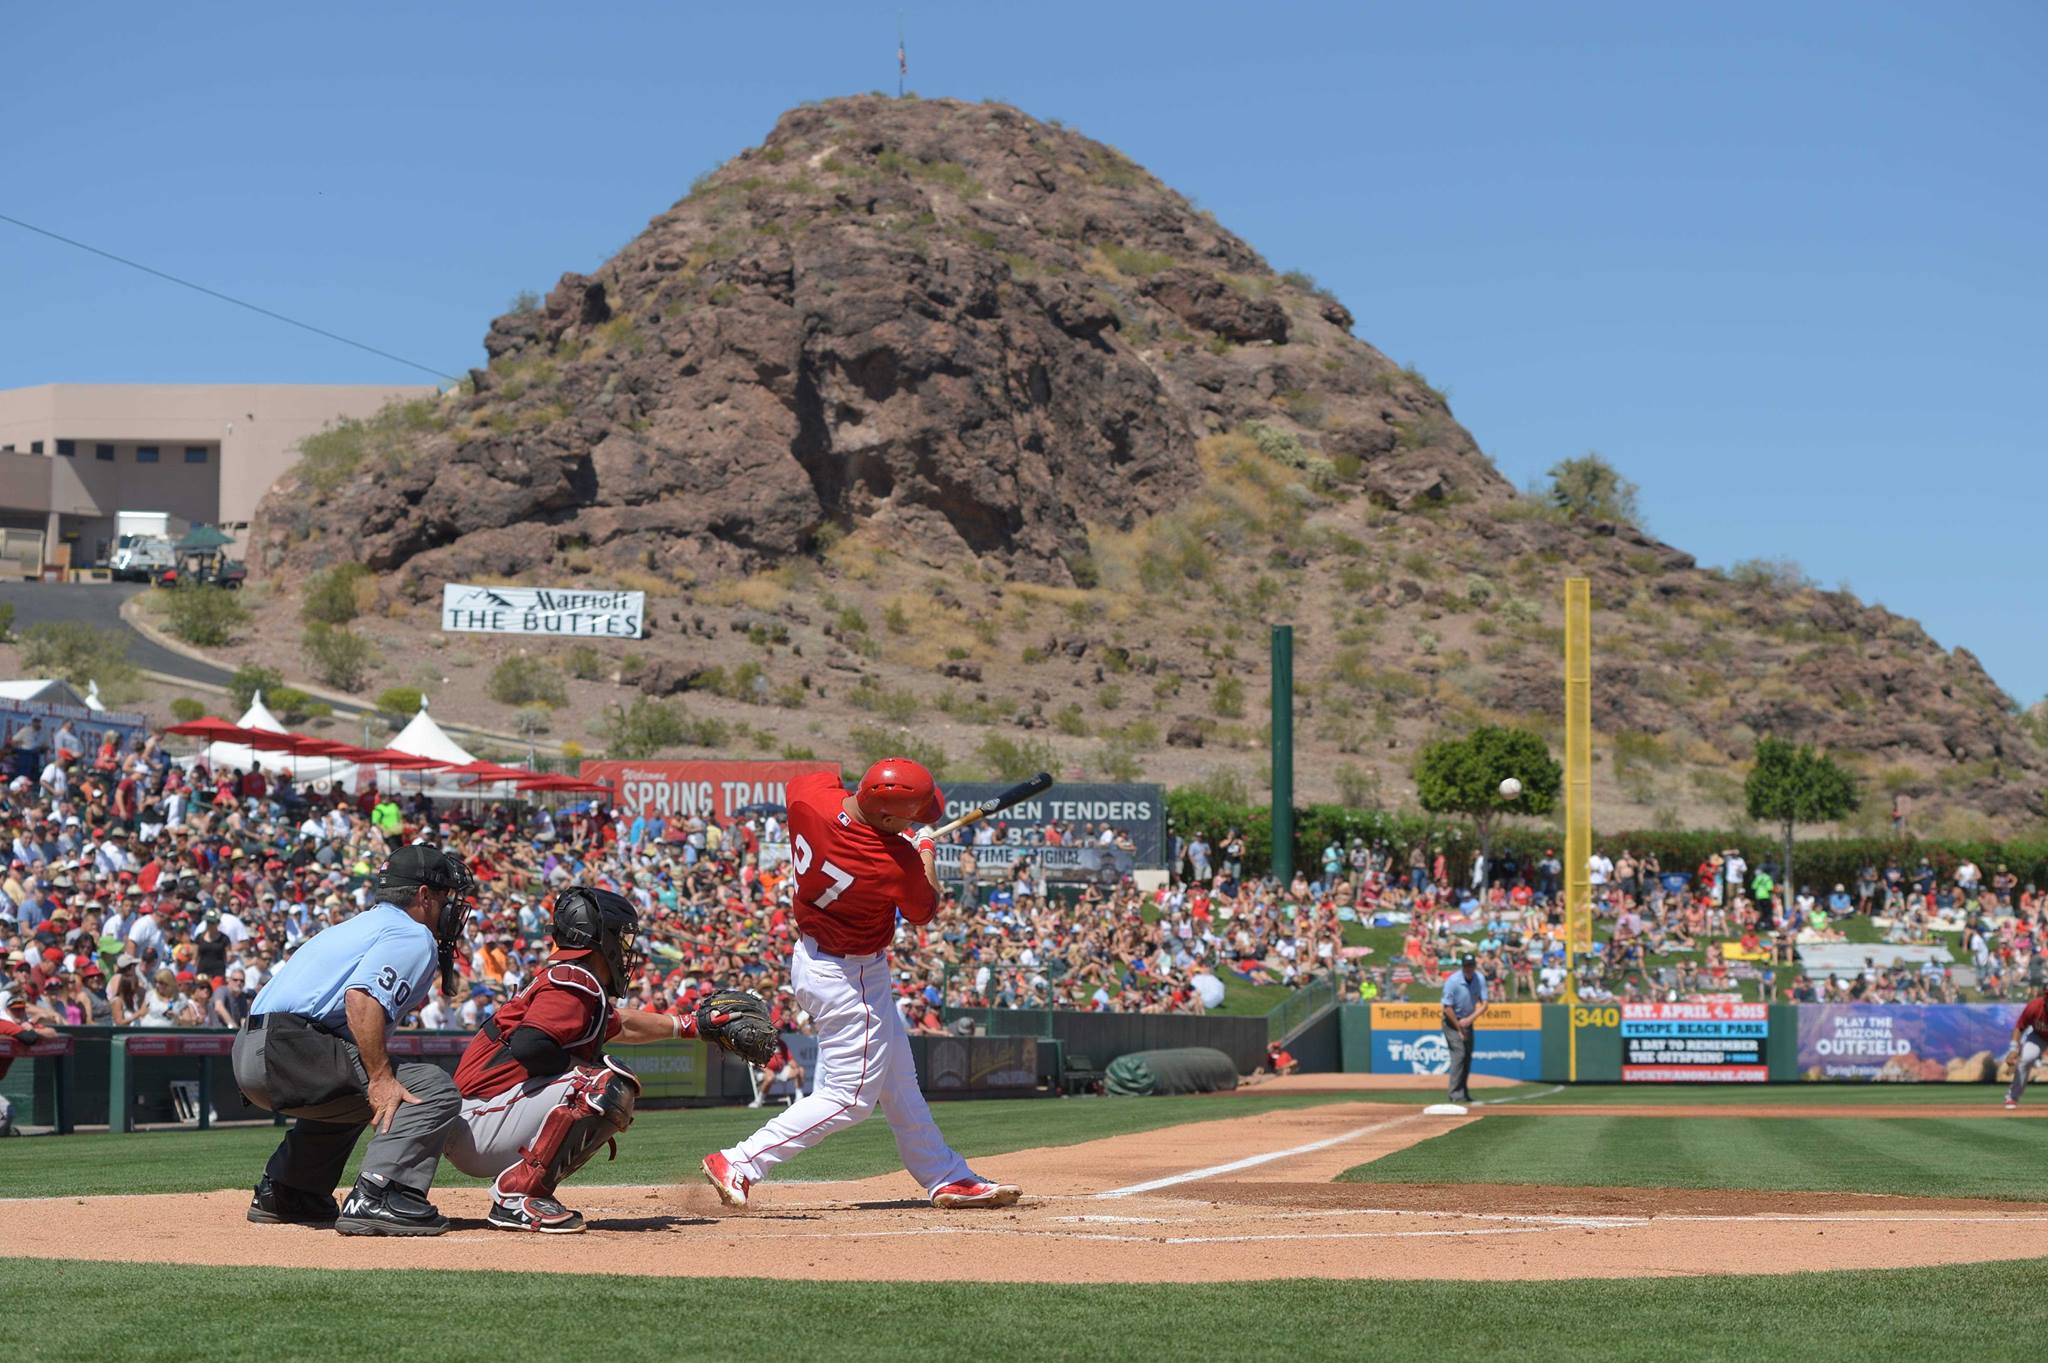 LA Angels springtraining tickets on sale; new safety protocols at